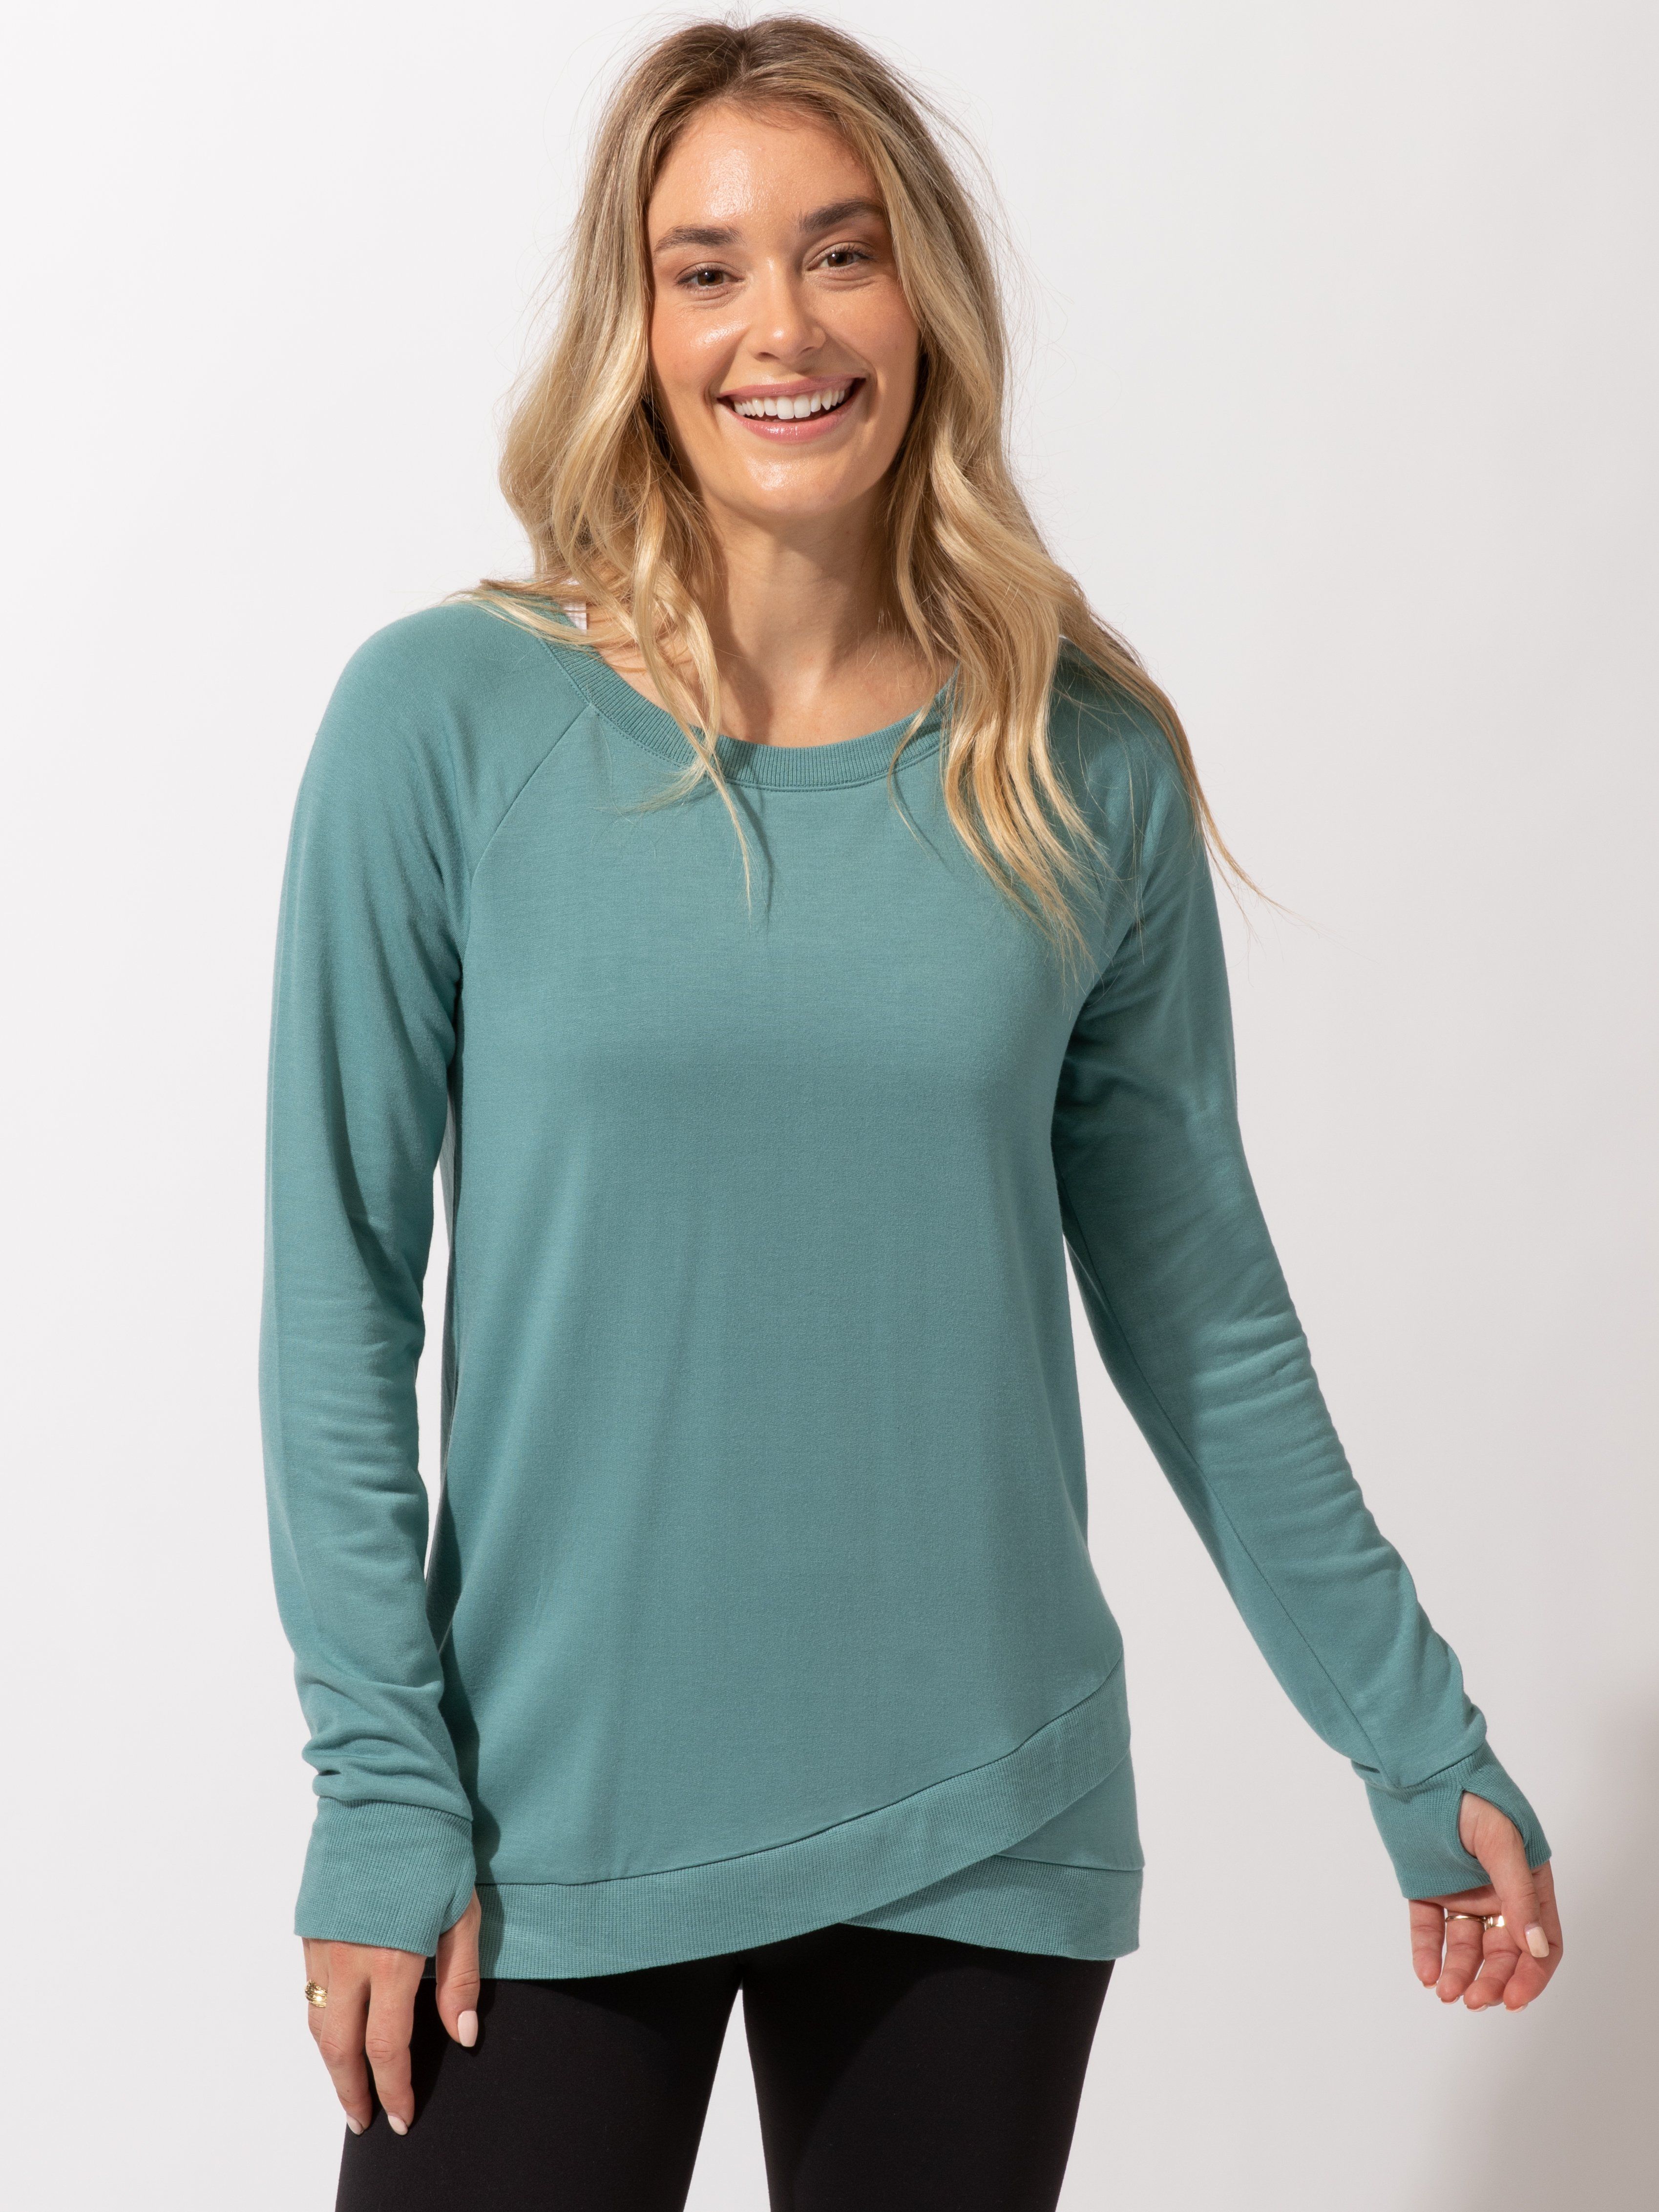 Leanna Feather Fleece Tunic Womens Tops Threads 4 Thought 